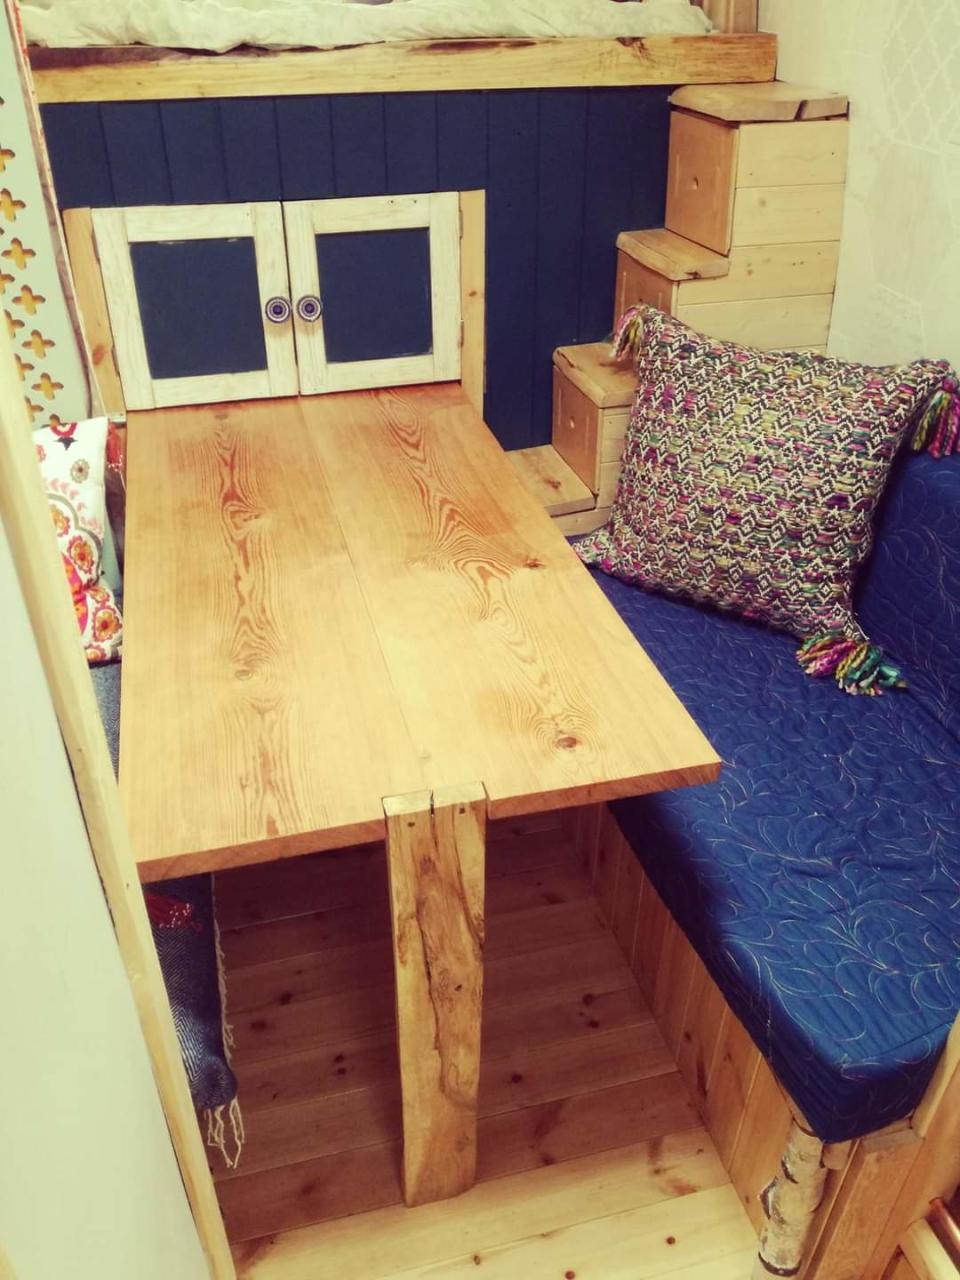 A pull-out dining table and seating area in the Firetruck Family's converted van.